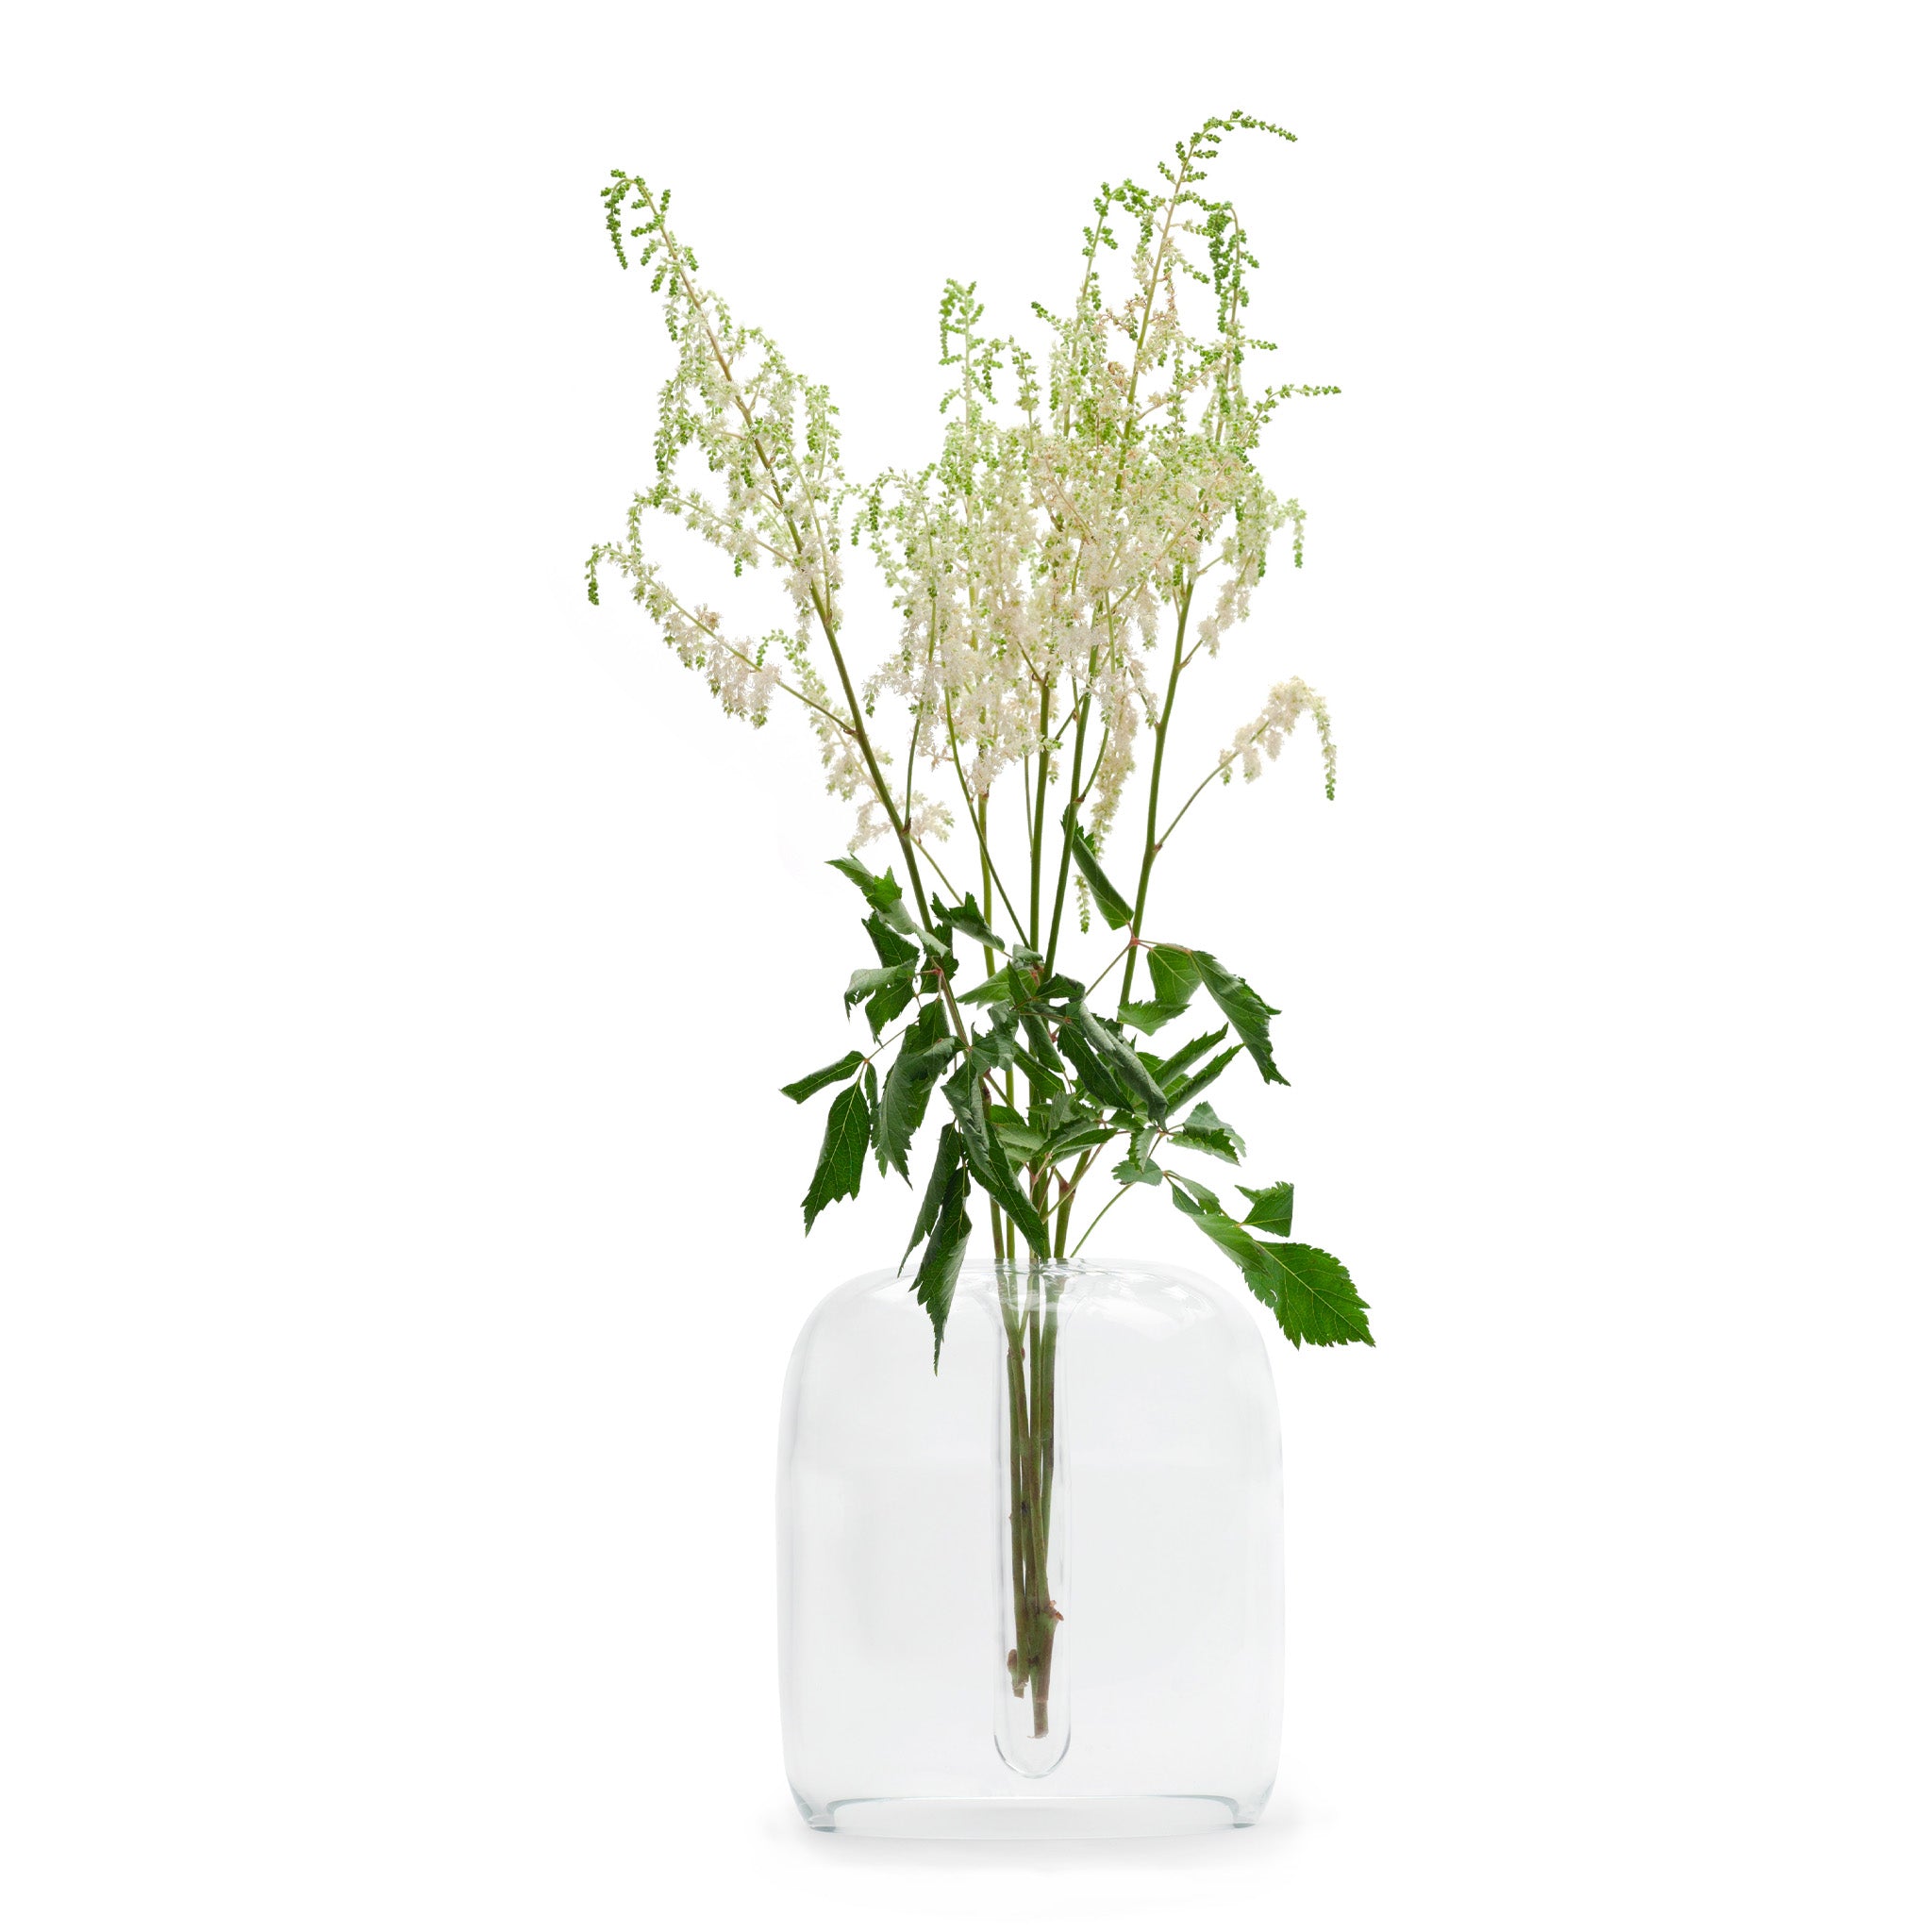 Soft Vase by Kristine Five Melvær for When Objects Work